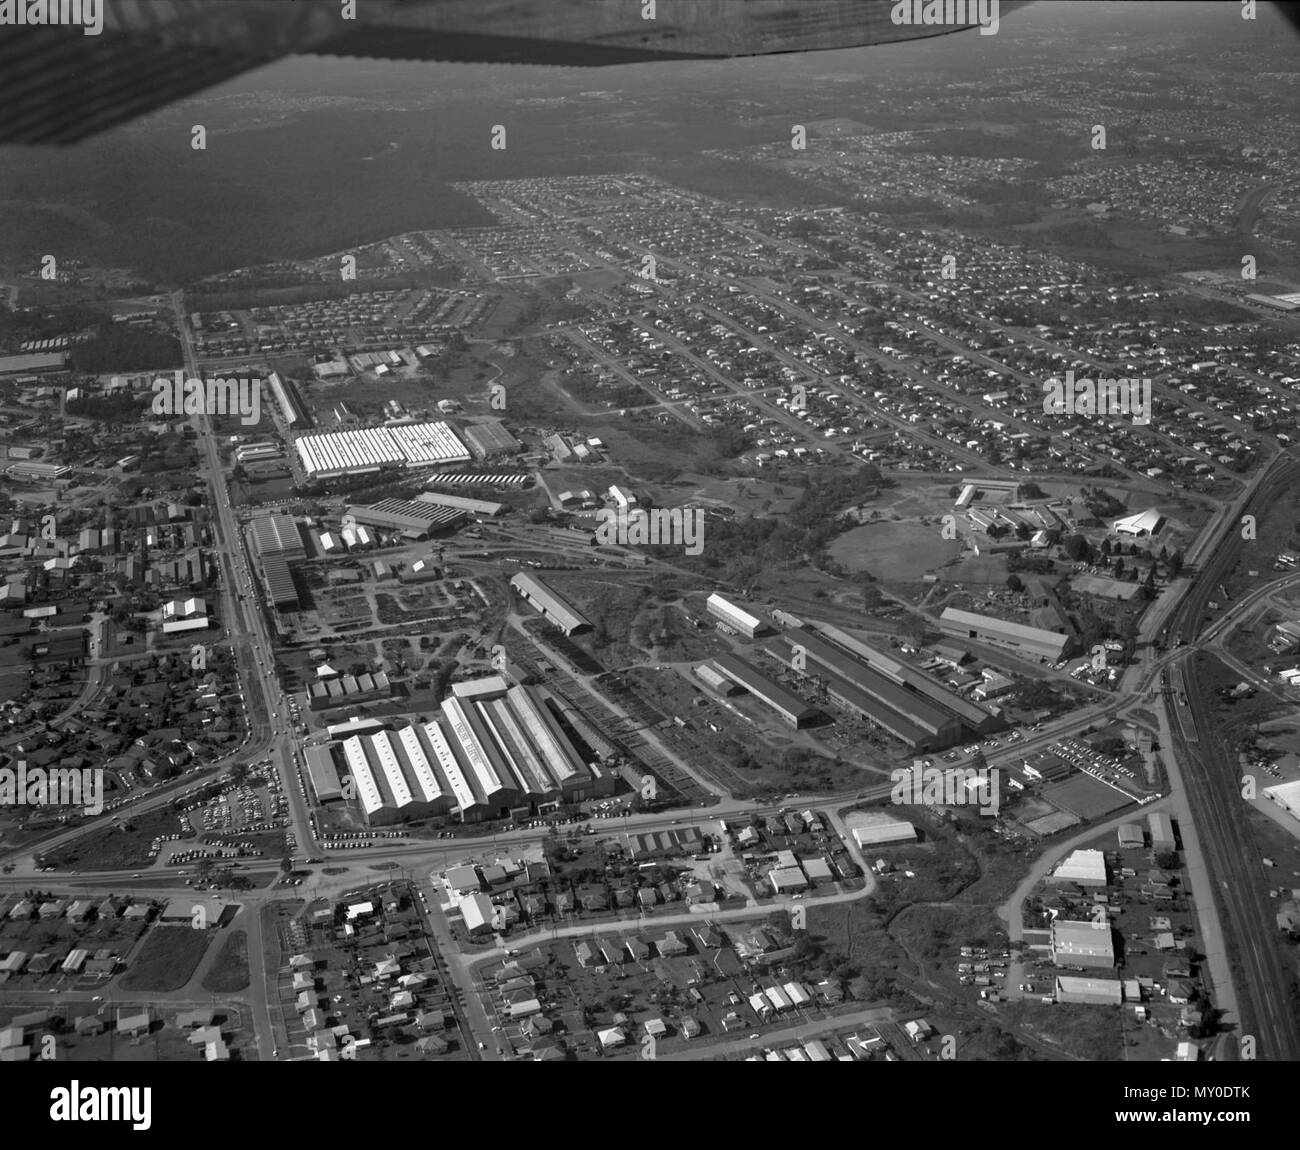 Rocklea Industrial Area, Brisbane, 1967. The Courier-Mail 8 April 1954  INDUSTRIAL SITES DEMAND. Southern firms set up offices and factories (  )   A BIG demand for industrial sites in and around Brisbane has been made in recent weeks by large southern industries and manufacturing firms.  Sydney and Melbourne firms which formerly had only a representative in Brisbane are now setting up branch offices, storage rooms, and, in some cases, factories. Real estate agents reported yesterday that already several sales of small sites had been made, while other firms had placed orders for suitable sites Stock Photo